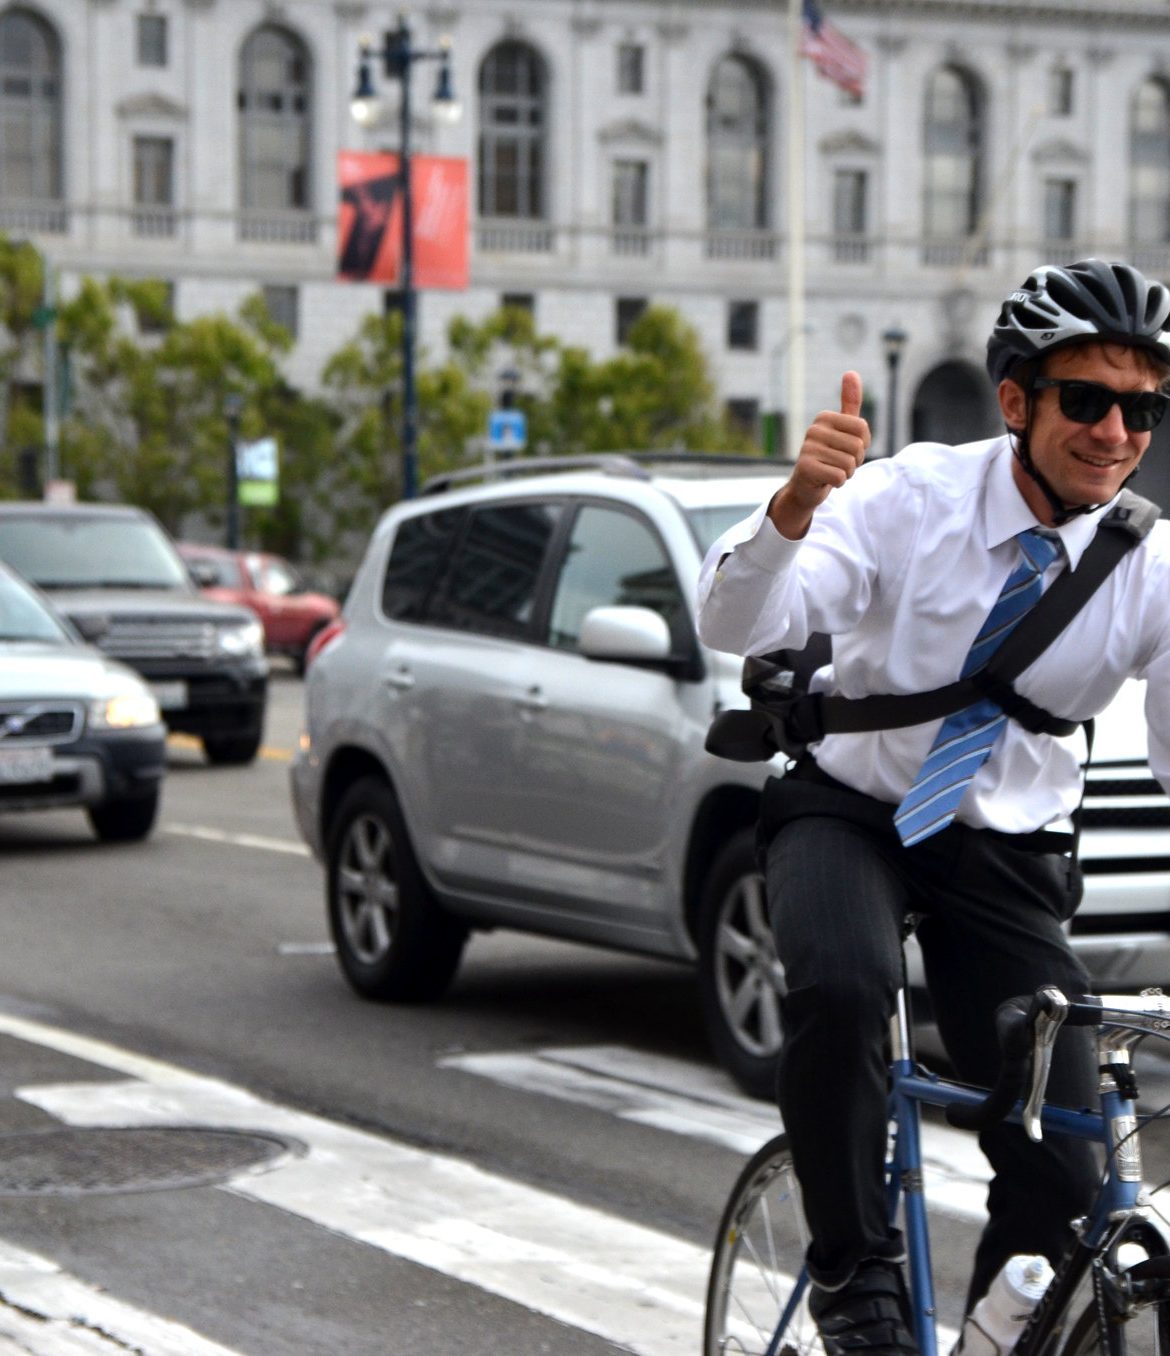 A bike commuter wearing a suit, tie, and a helmet flashes a thumbs up to the photographer while biking on a busy road in San Francisco.